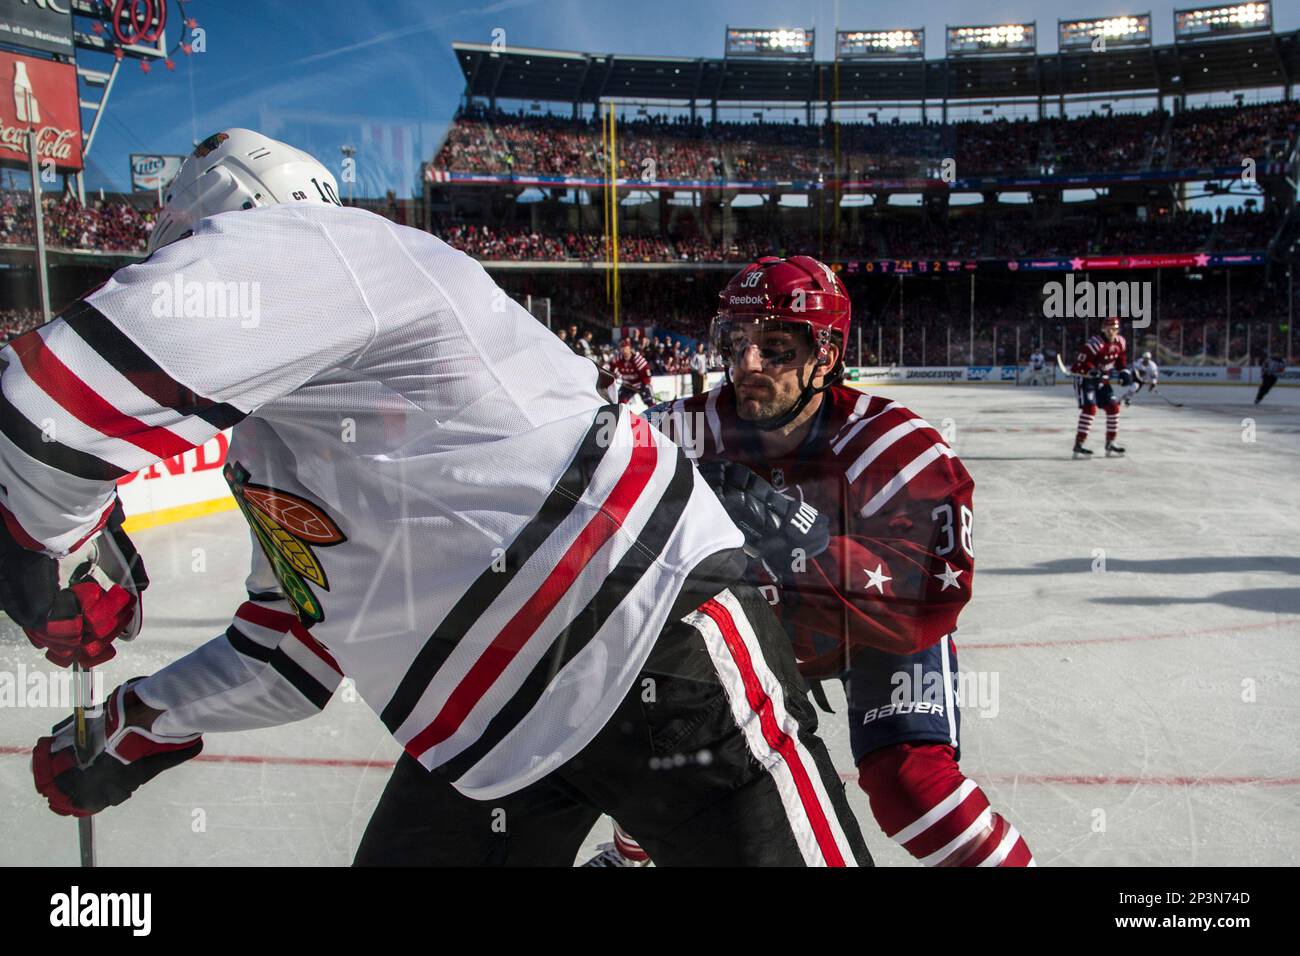 2015 WINTER CLASSIC BETWEEN THE WASHINGTON CAPITALS AND CHICAGO